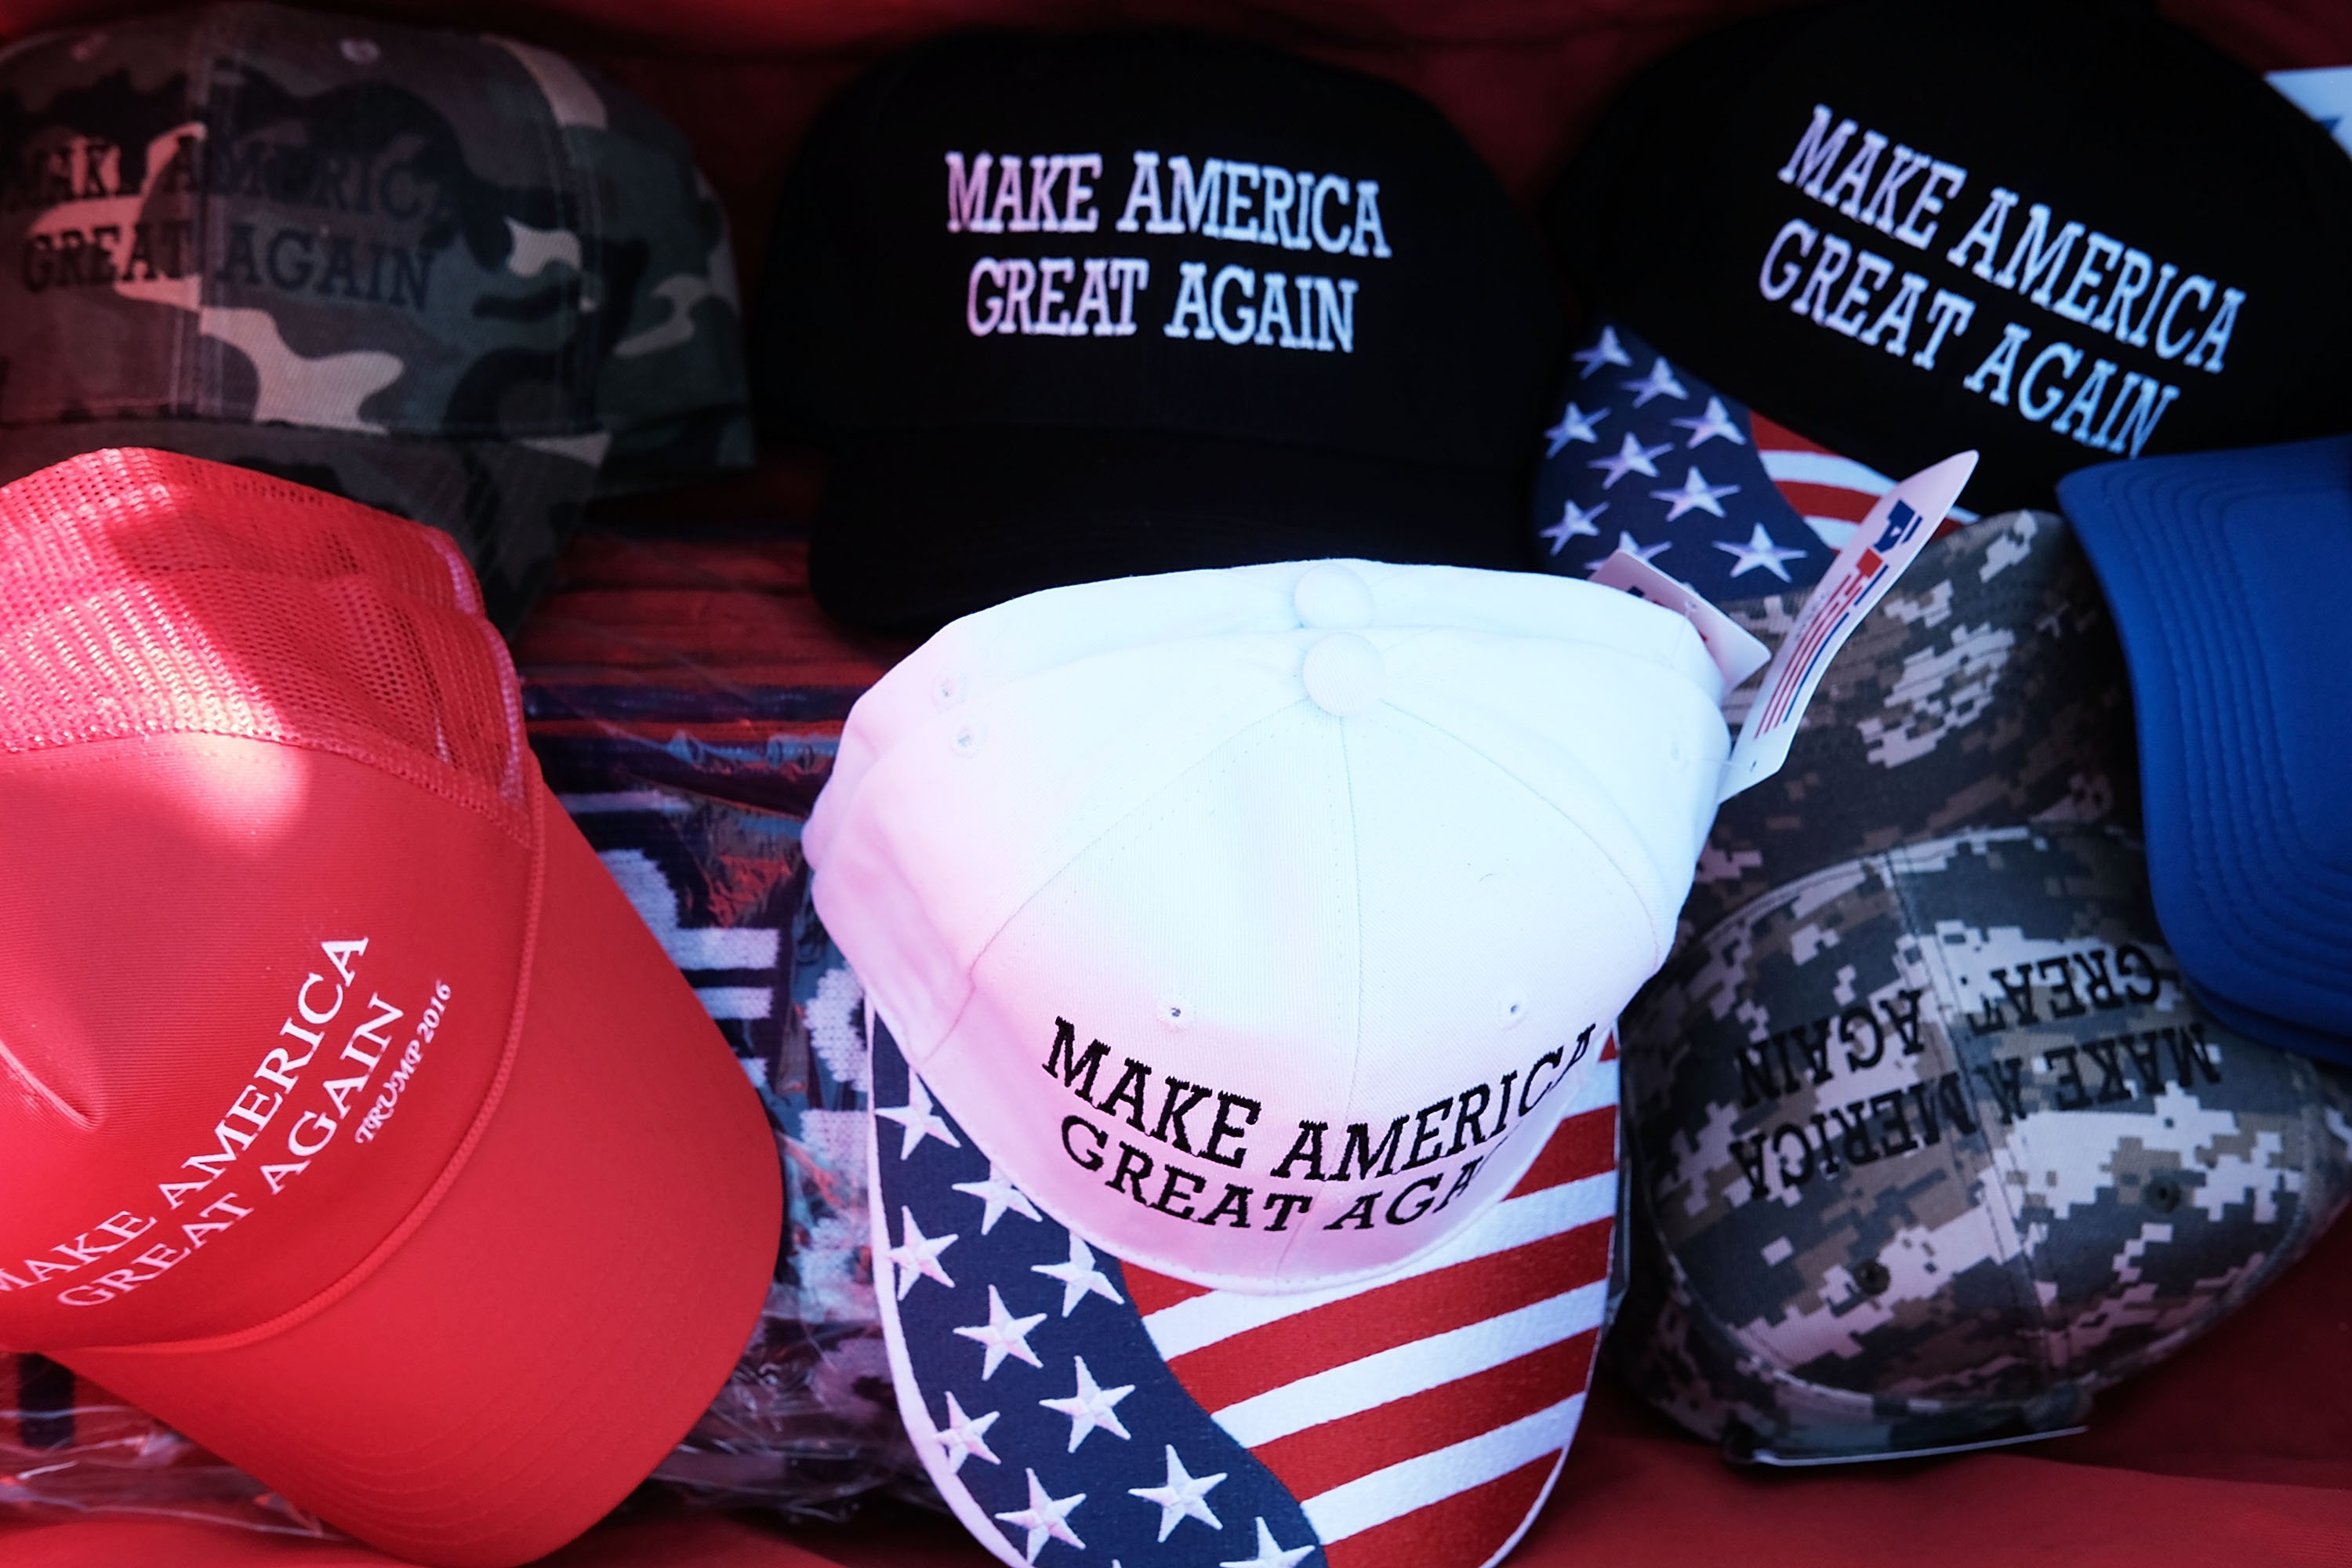 Different styles of MAGA hats being sold at a rally | Photo: Getty Images